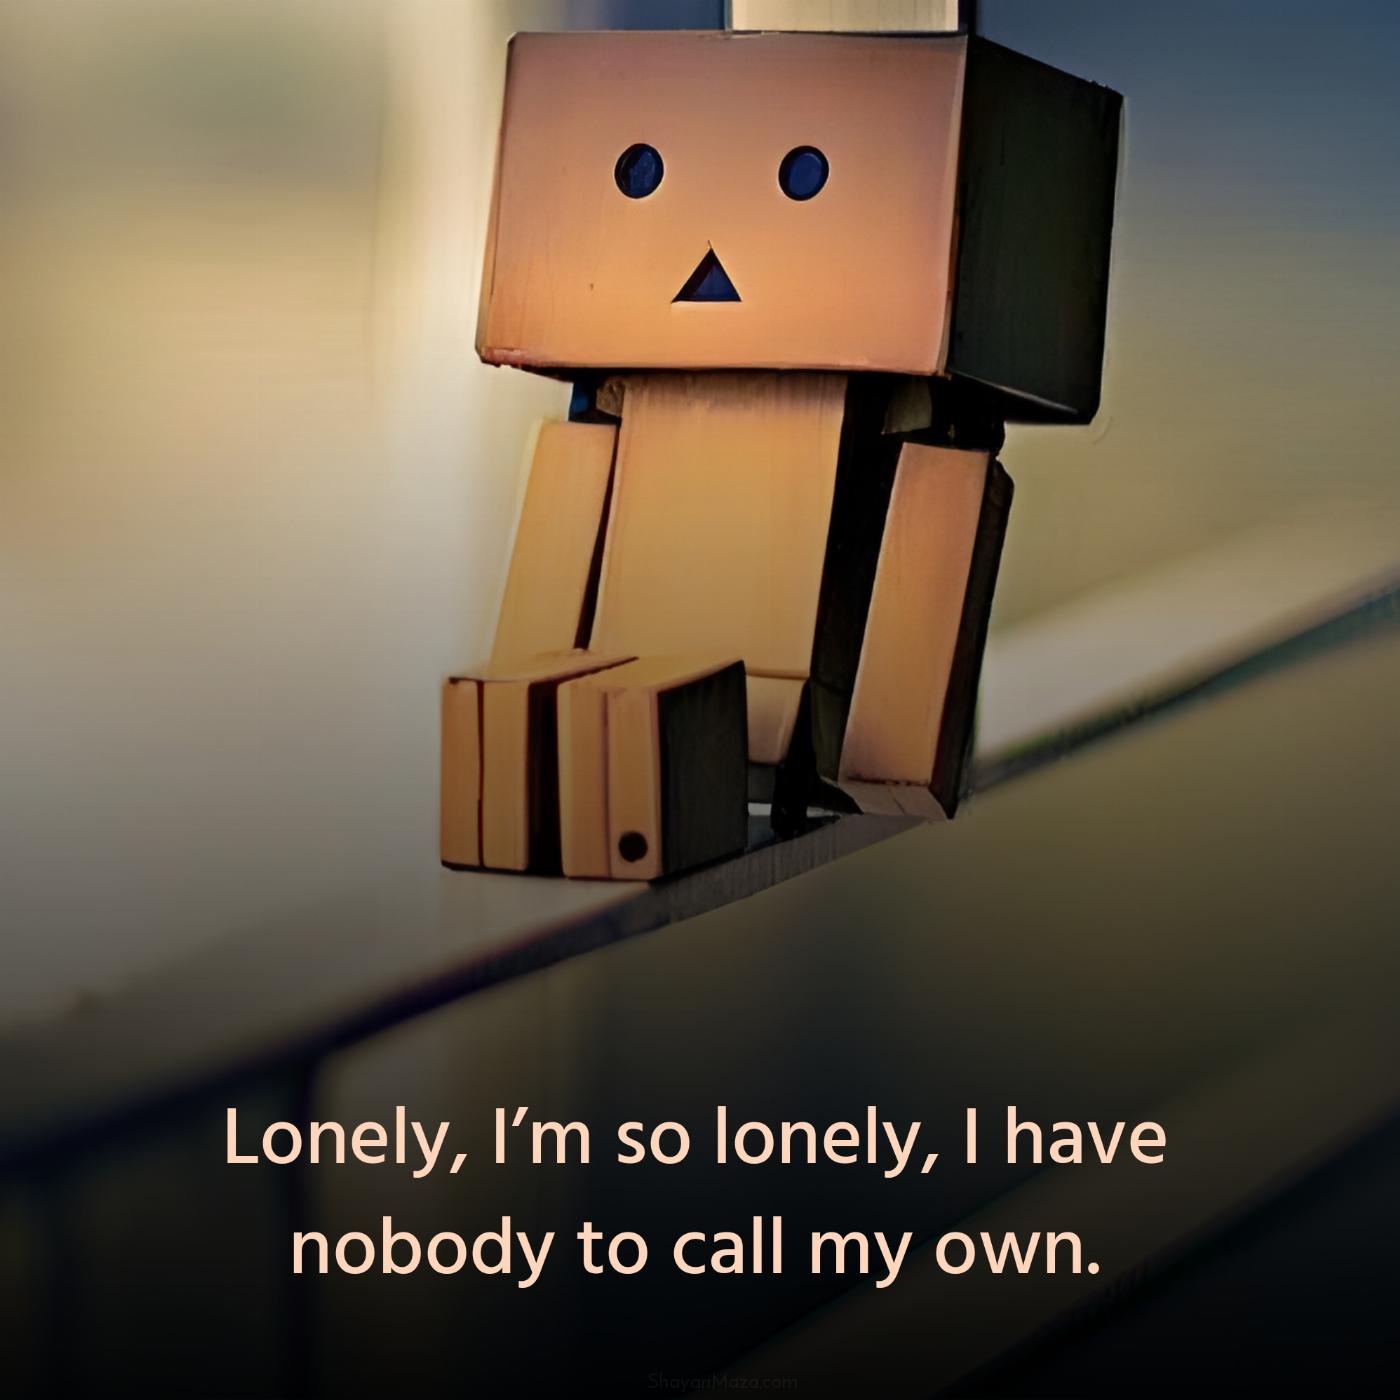 Lonely Im so lonely I have nobody to call my own